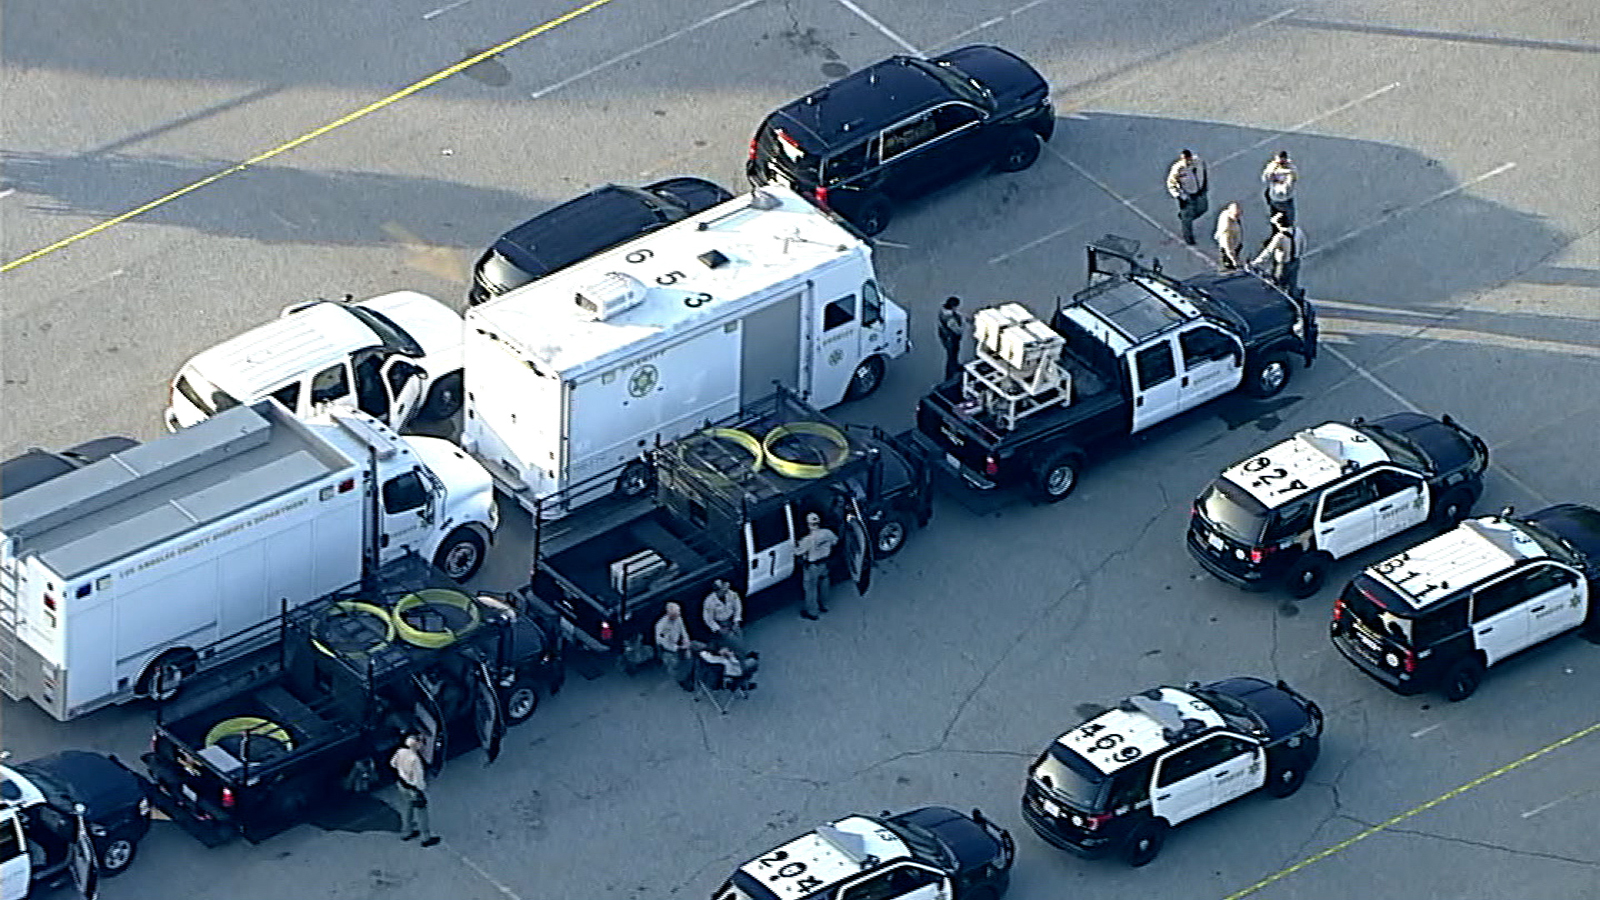 This aerial view shows police vehicles at a parking lot in Los Angeles, California on May 1.